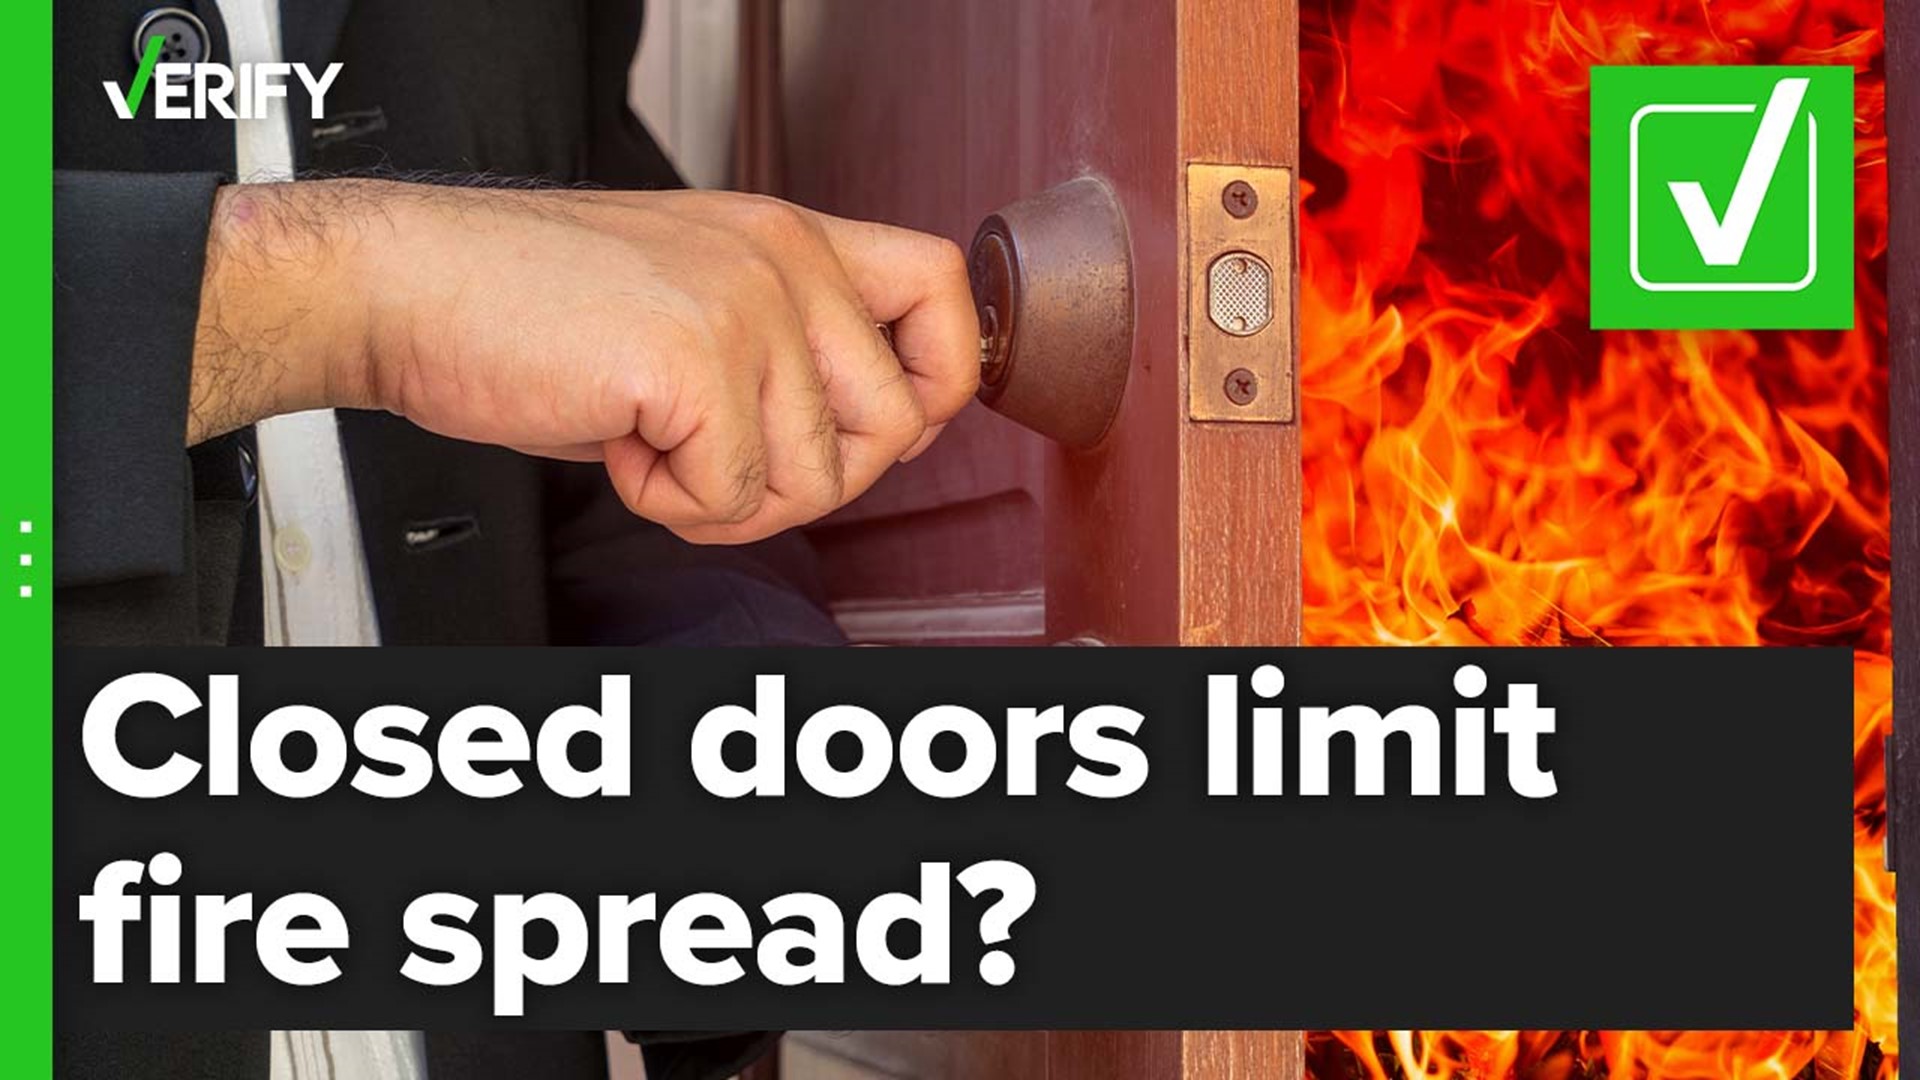 Leaving doors open can allow smoke and fire to spread faster.